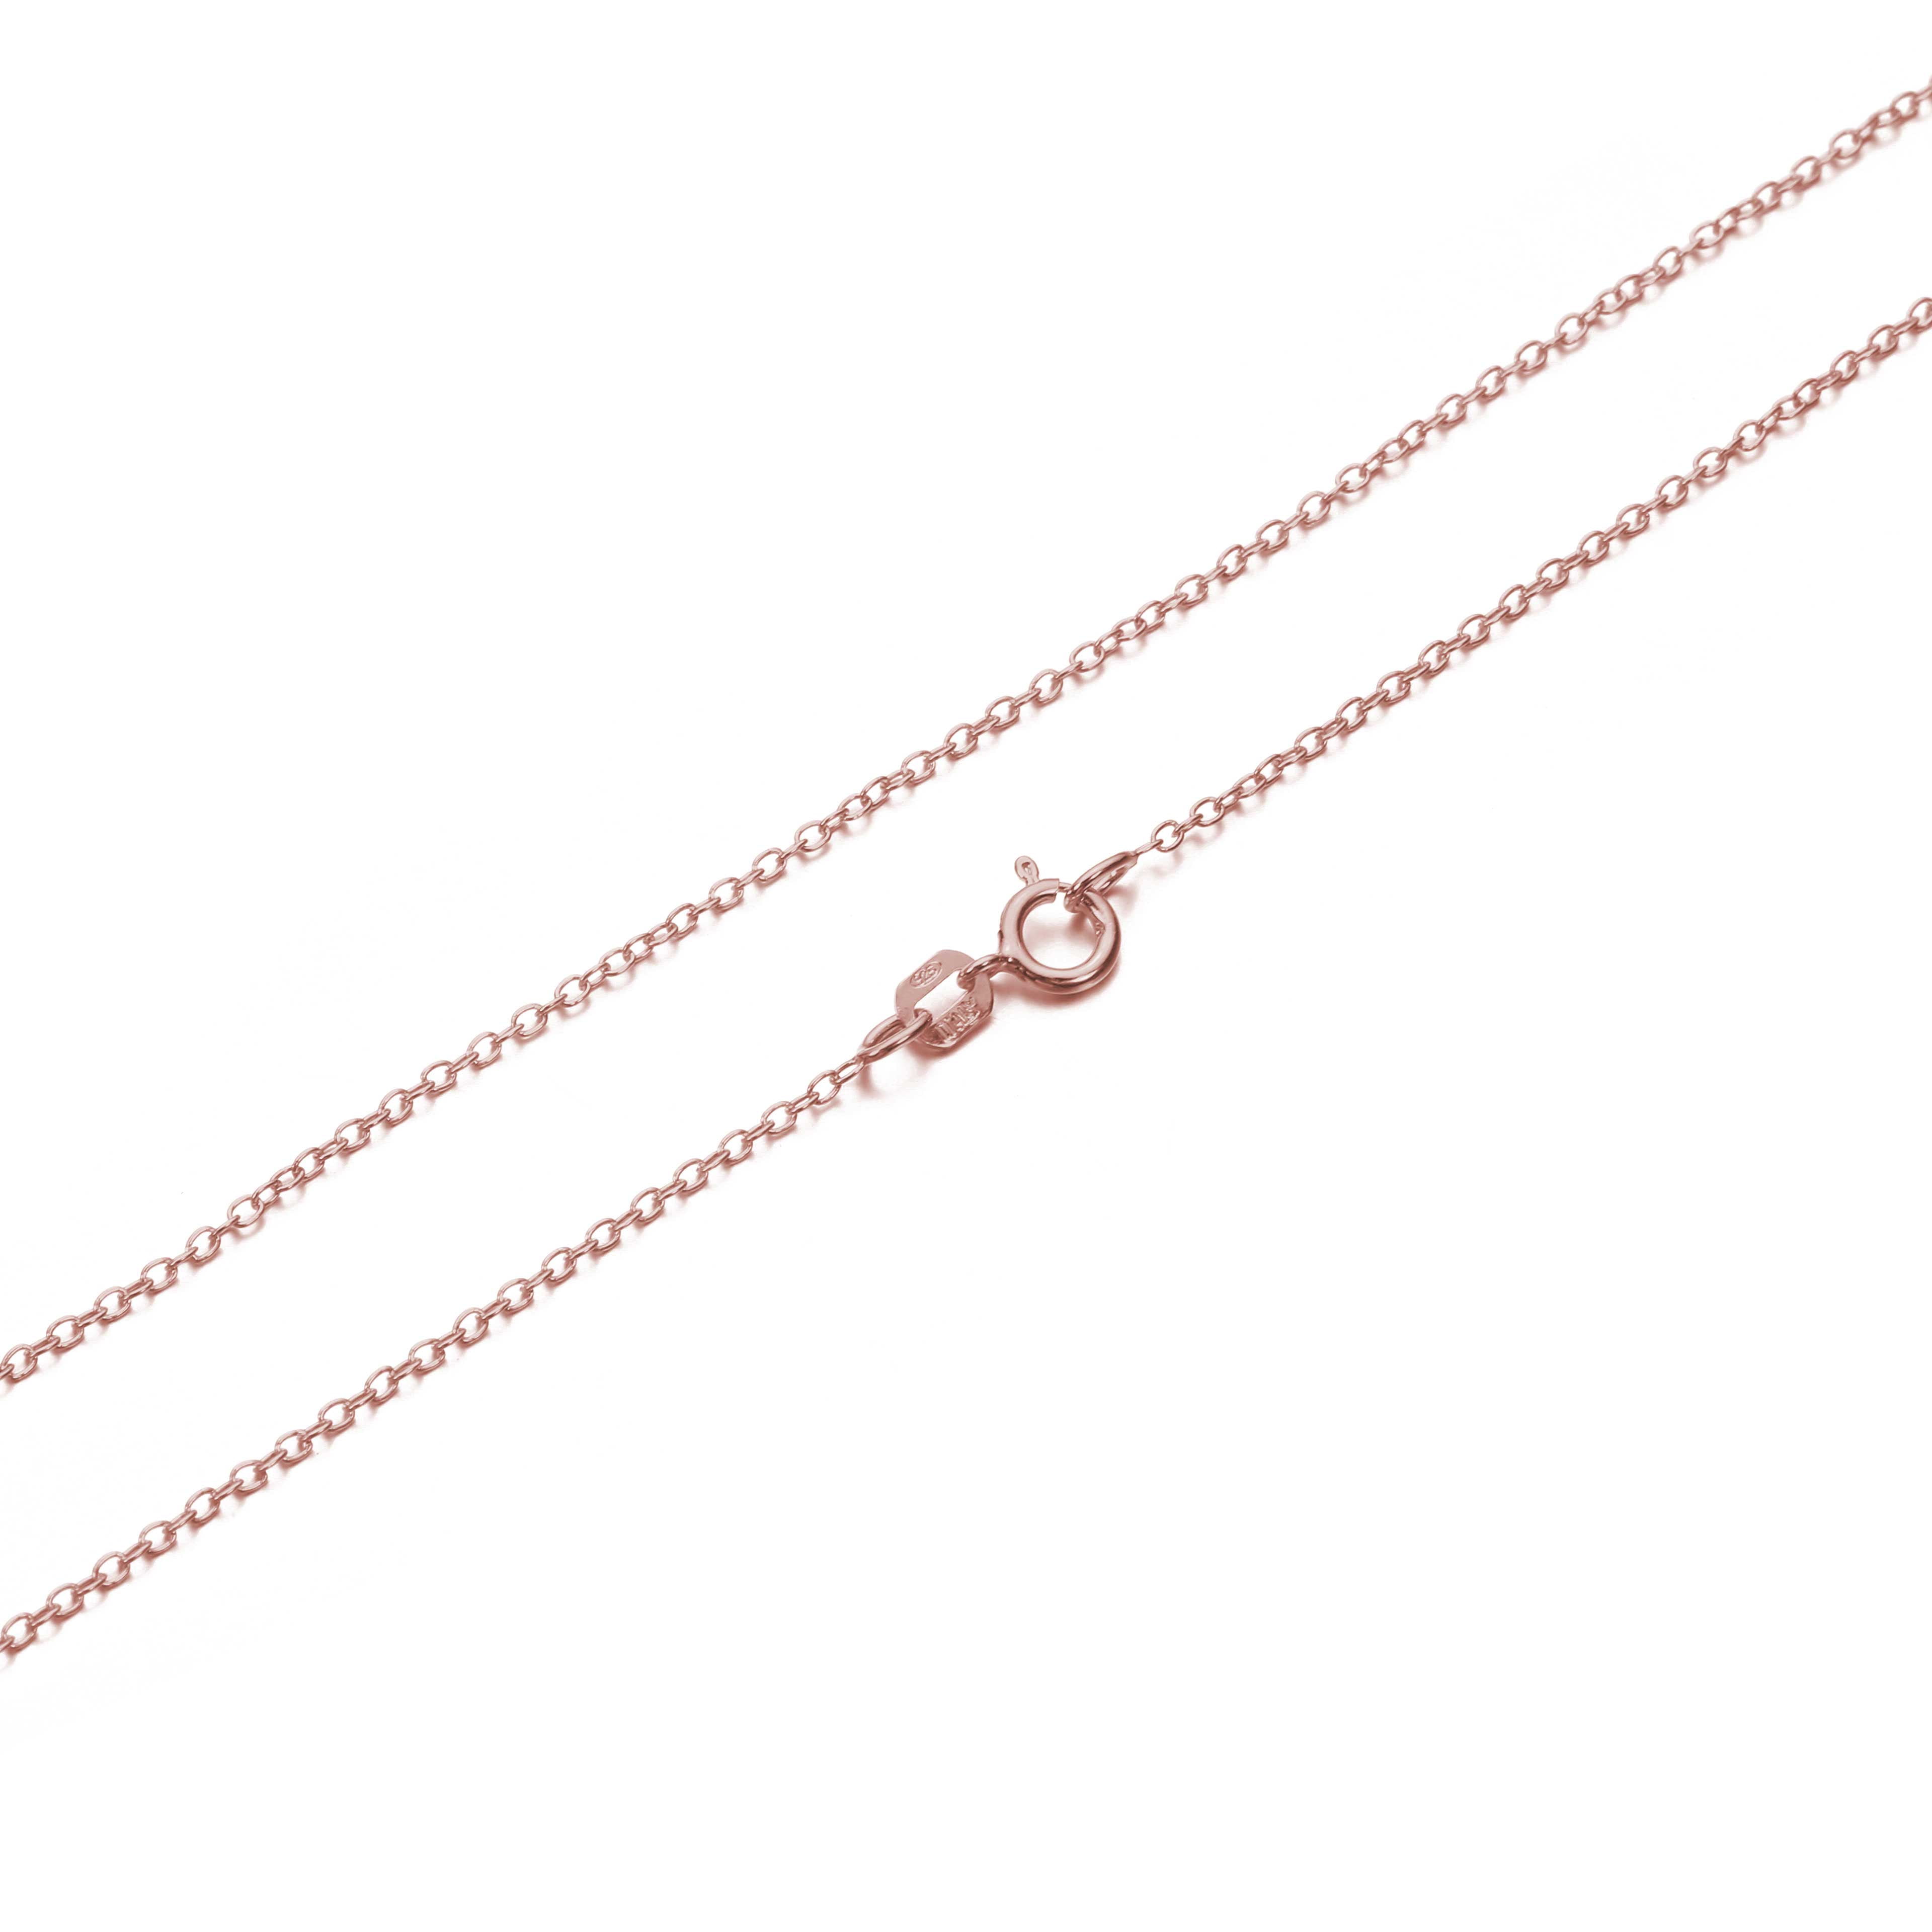 KEZEF Creations Sterling silver 1mm Box Chain Necklace Rose Gold Plated Silver Sizes 12-40 Made in Italy